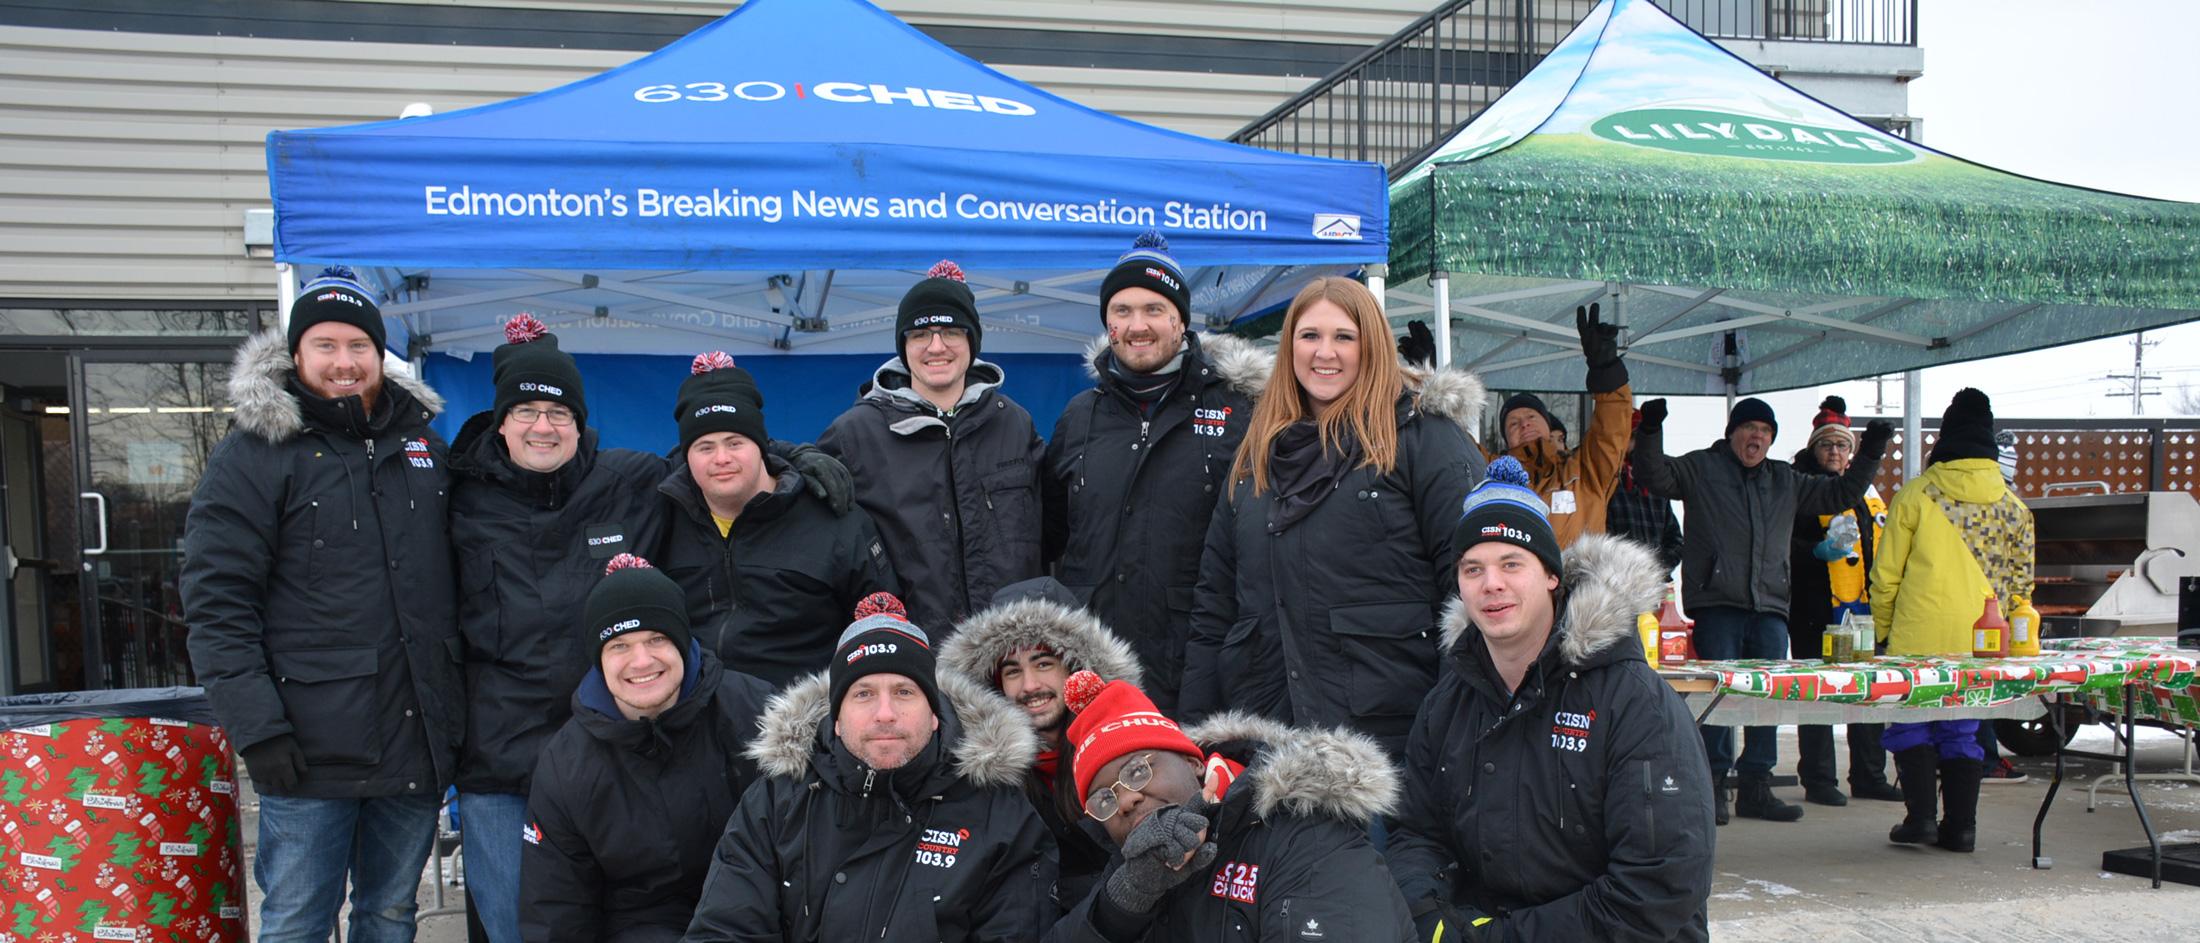 A group photo in front of the 630 CHED tent at a winter holiday event in Edmonton, Alberta.